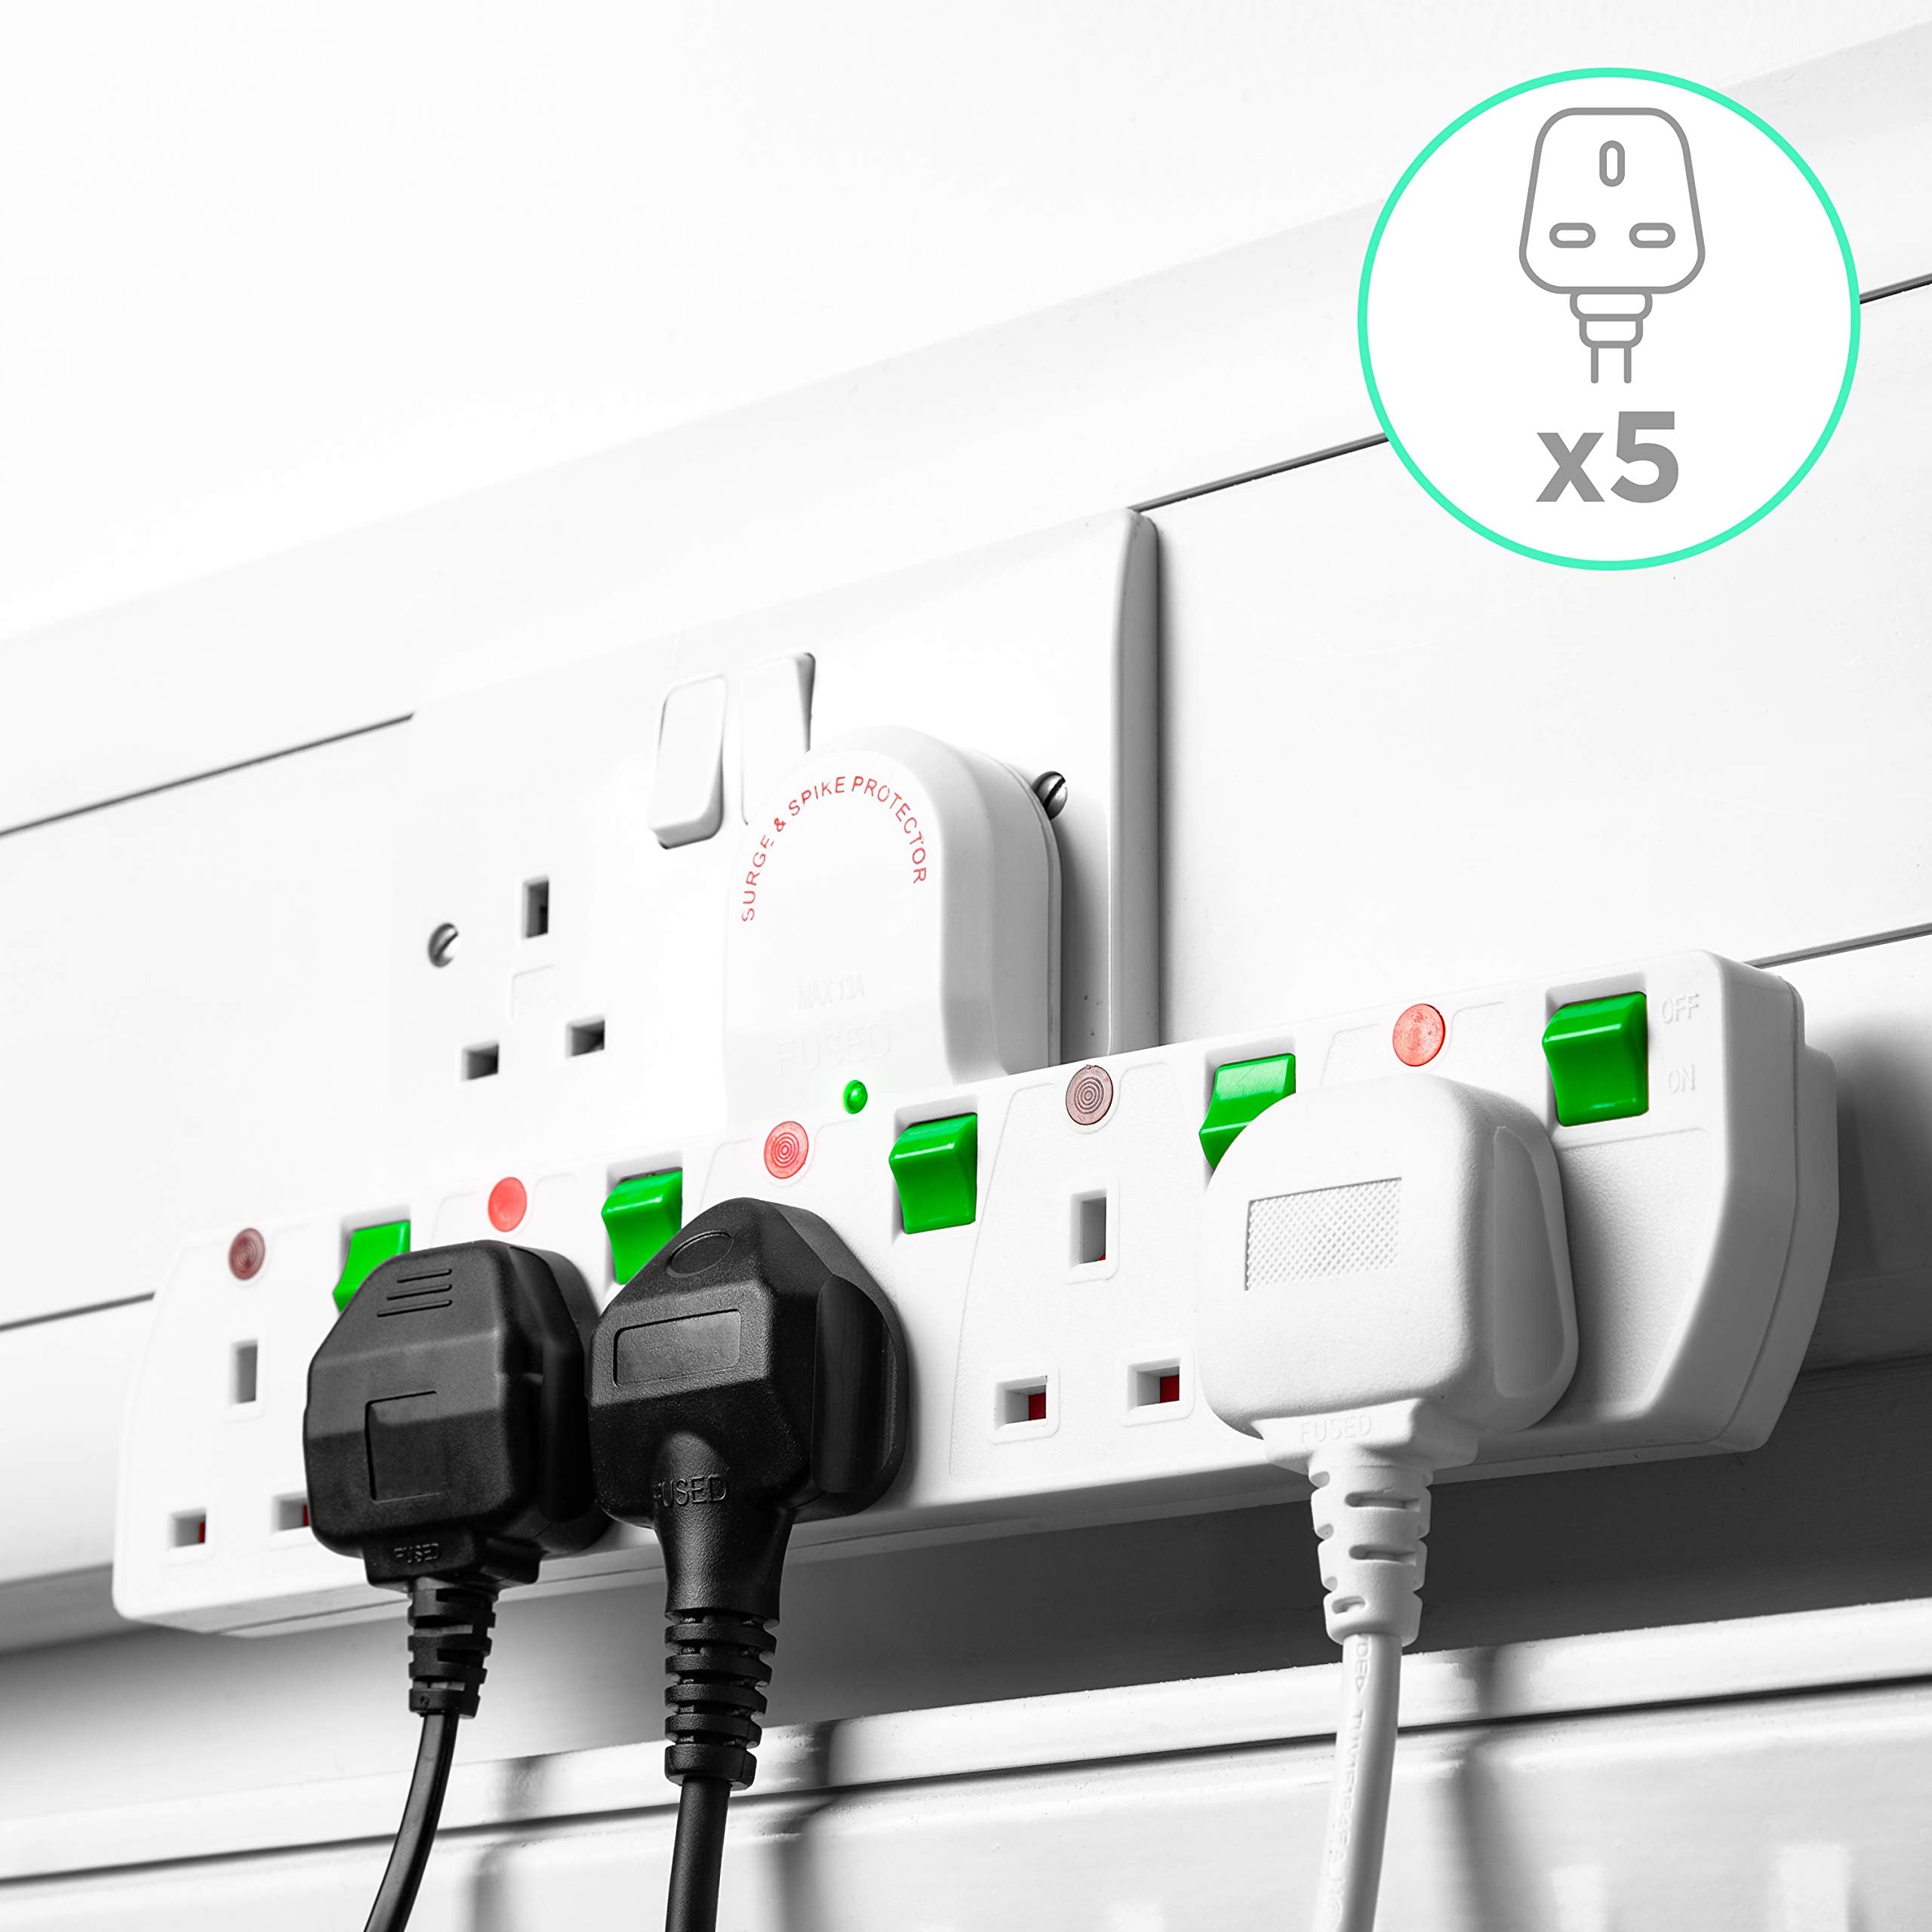 Duronic S125W 5 Way UK Plug Surge Protected Power Extension Adaptor Multi Socket | Switched | White| Switches Turns 1 Socket Into 5, Not 4 | Engineered To Tell You When Surge Is On